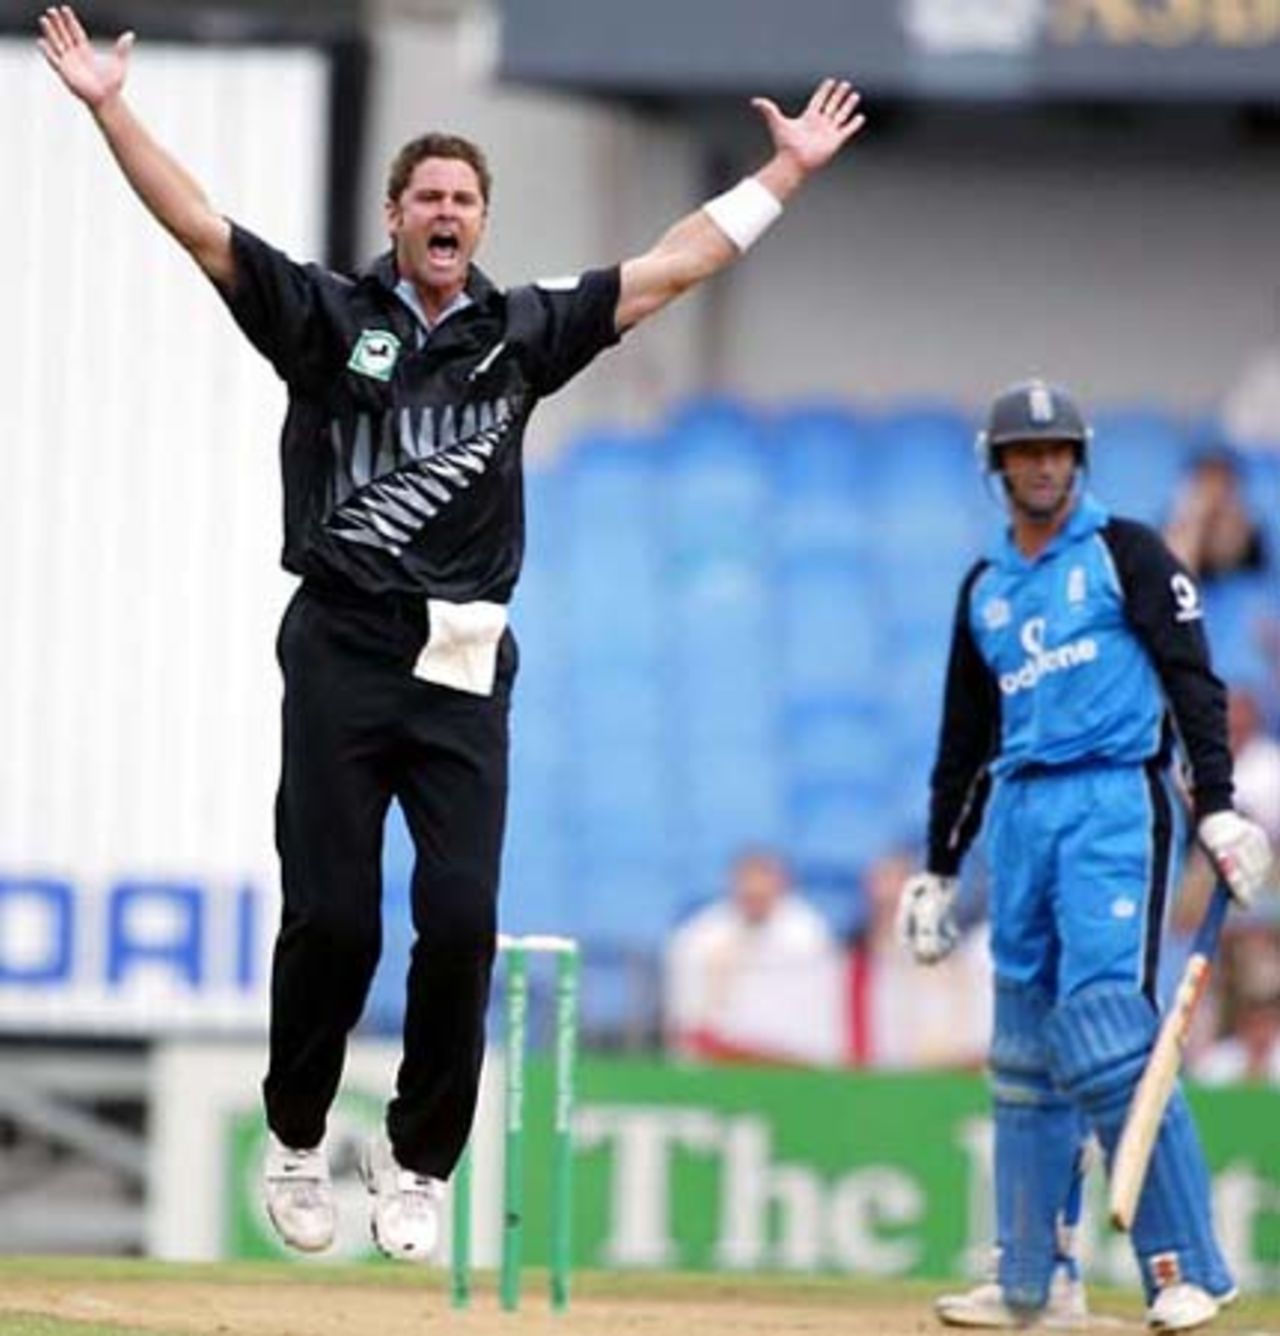 New Zealand bowler Chris Cairns successfully appeals for lbw against England batsman Nasser Hussain. Hussain was dismissed for 17 during Cairns' spell of 2-39 from eight overs. 4th ODI: New Zealand v England at Eden Park, Auckland, 23 February 2002.